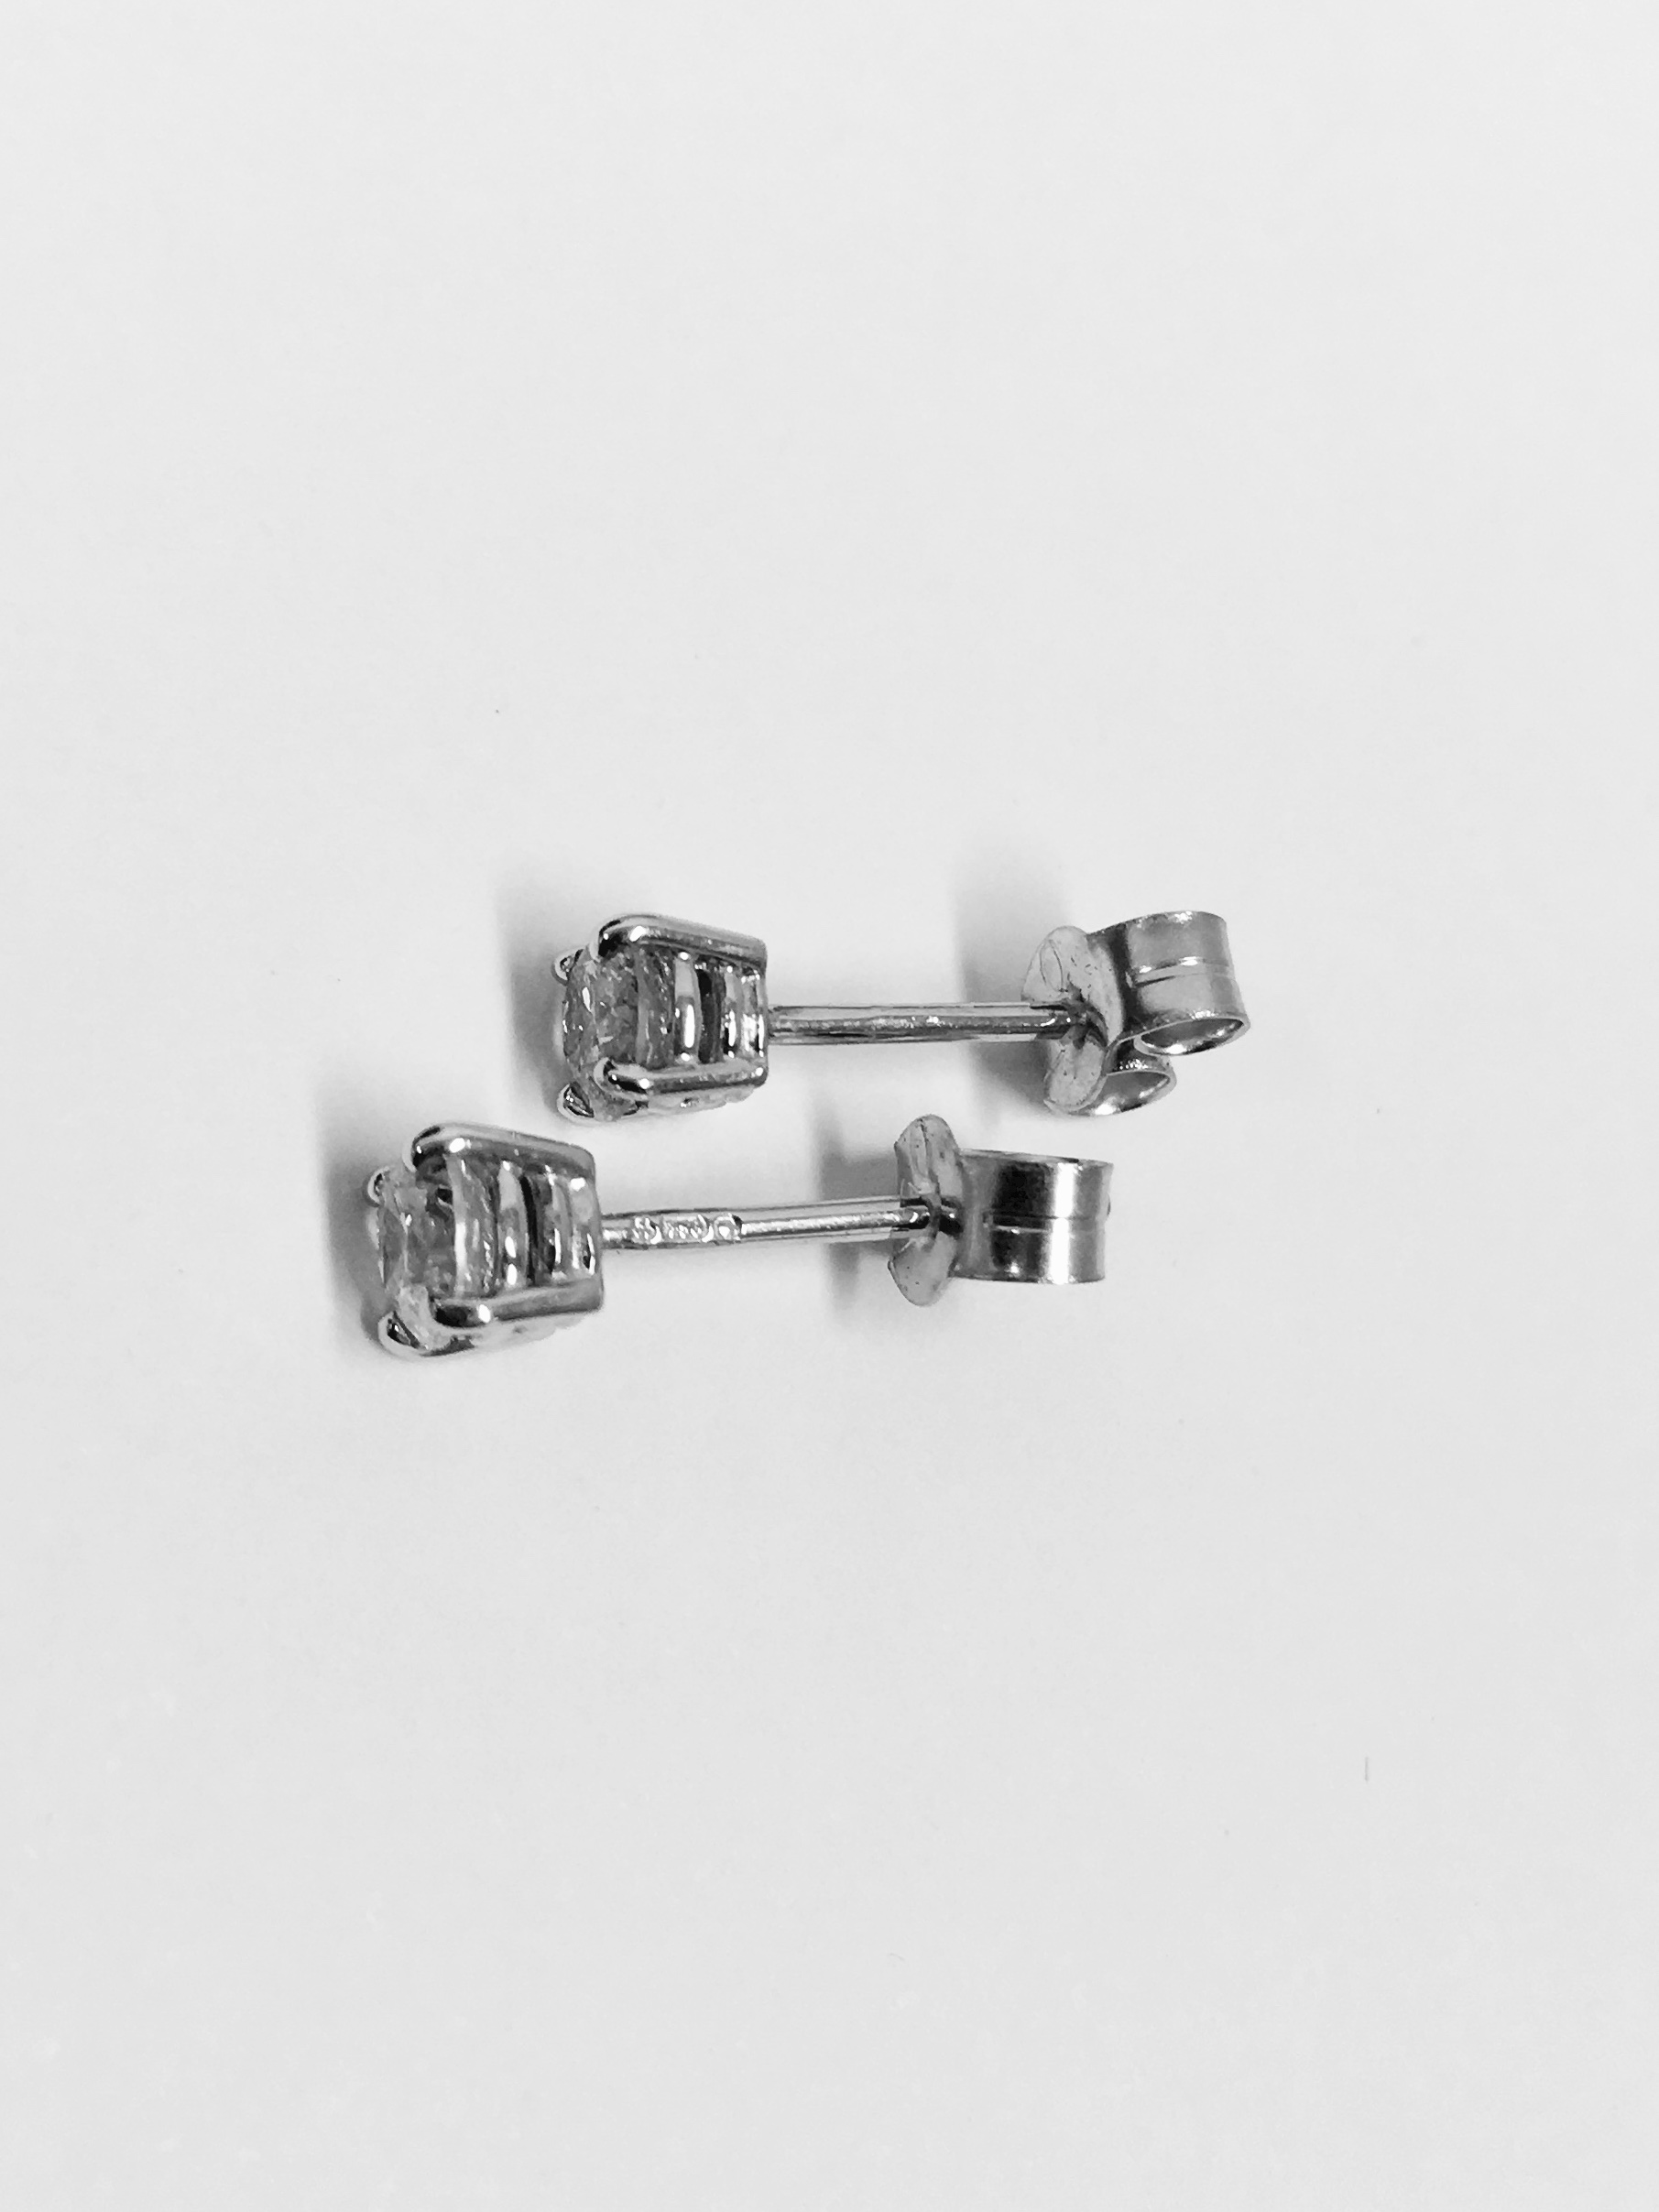 0.20ct Solitaire diamond stud earrings set with brilliant cut diamonds - Image 3 of 4